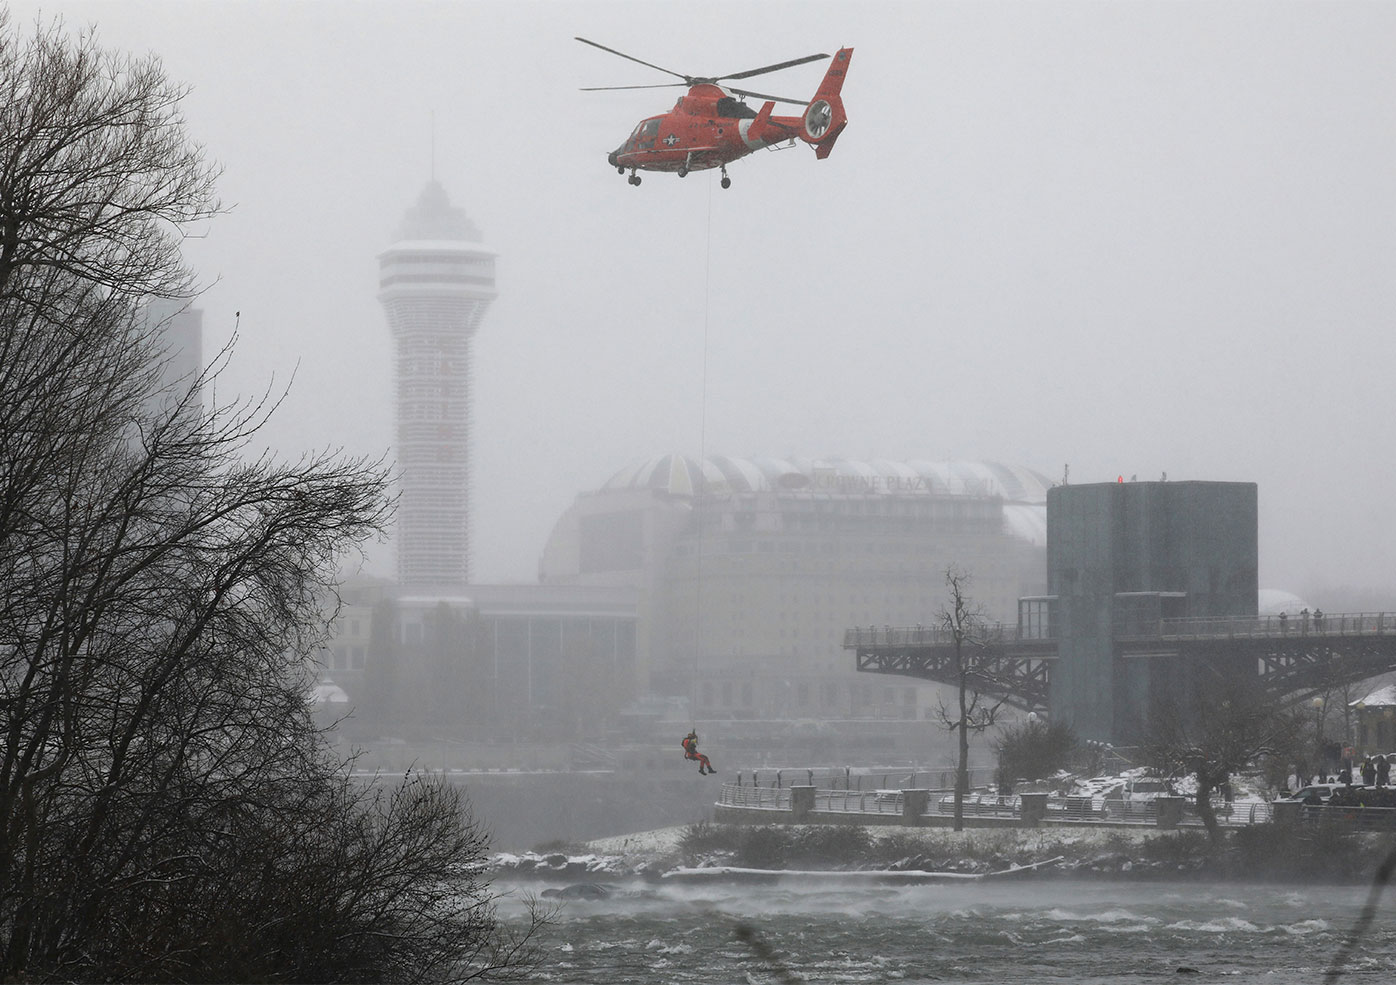 A US Coast Guard rescue diver is lowered toward the vehicle lodged in the water at the brink of Niagara Falls.